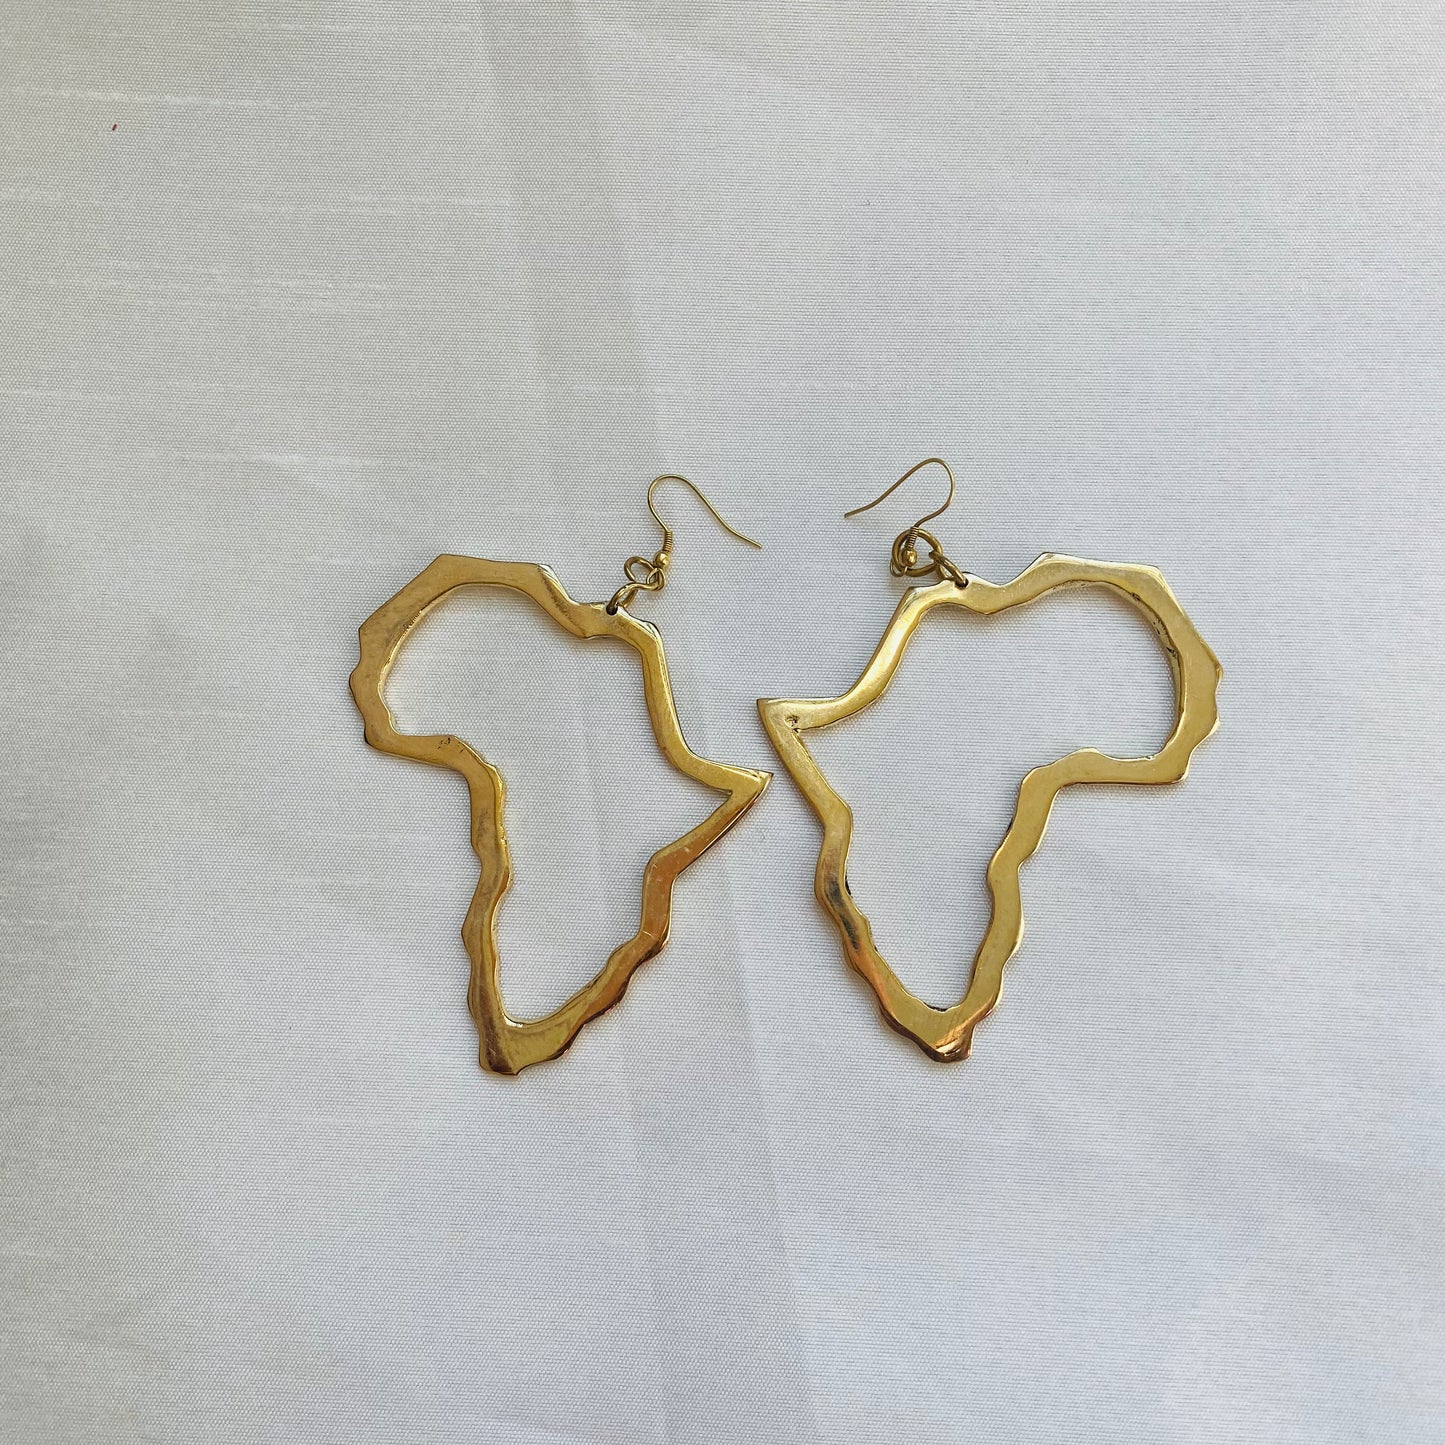 Cut-out Map of Africa Dangles